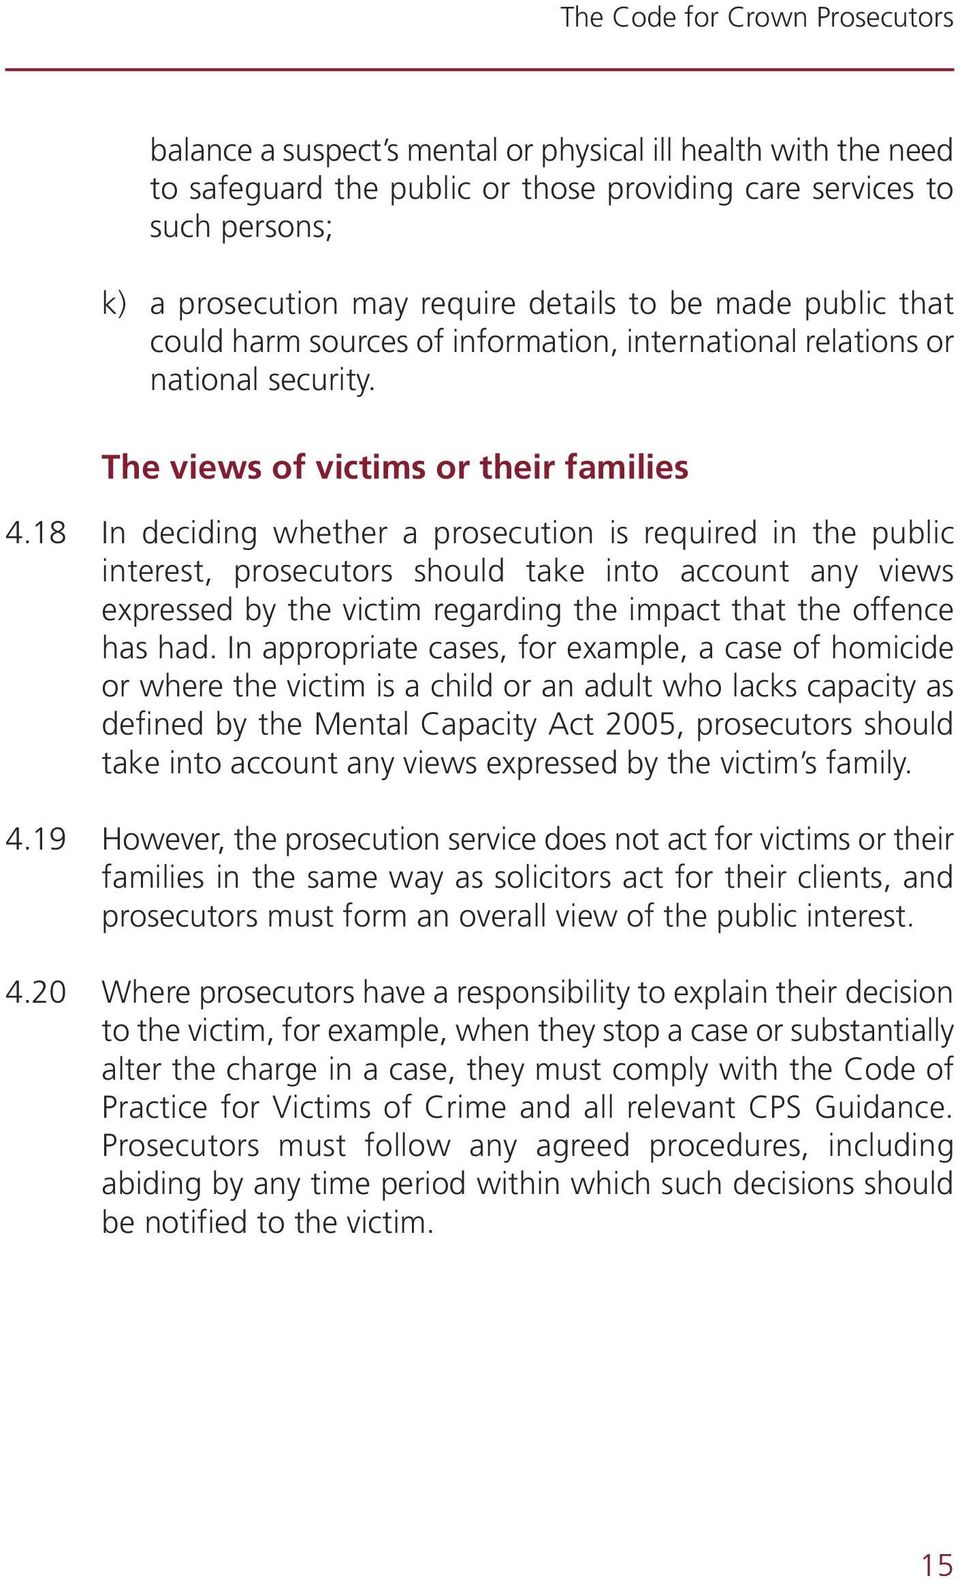 18 In deciding whether a prosecution is required in the public interest, prosecutors should take into account any views expressed by the victim regarding the impact that the offence has had.